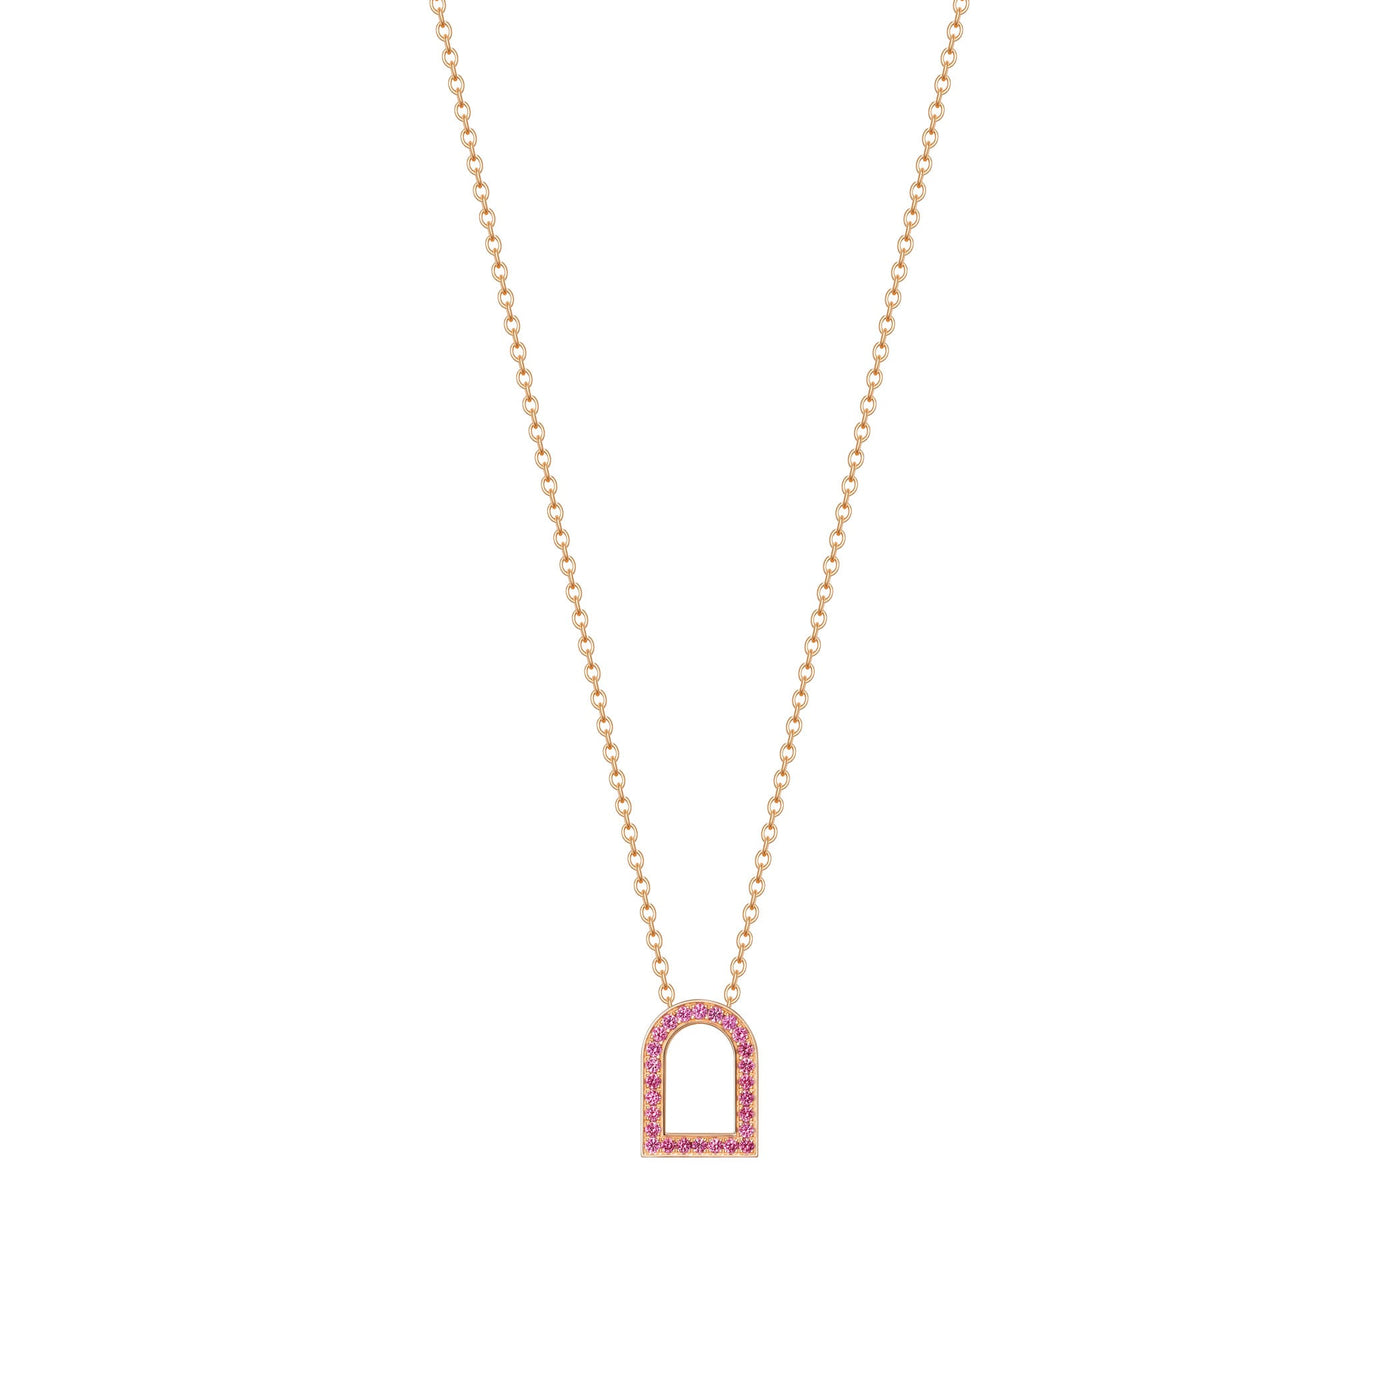 L'Arc Voyage Charm MM, 18k Rose Gold with Galerie Pink Sapphires on Chain Necklace - DAVIDOR